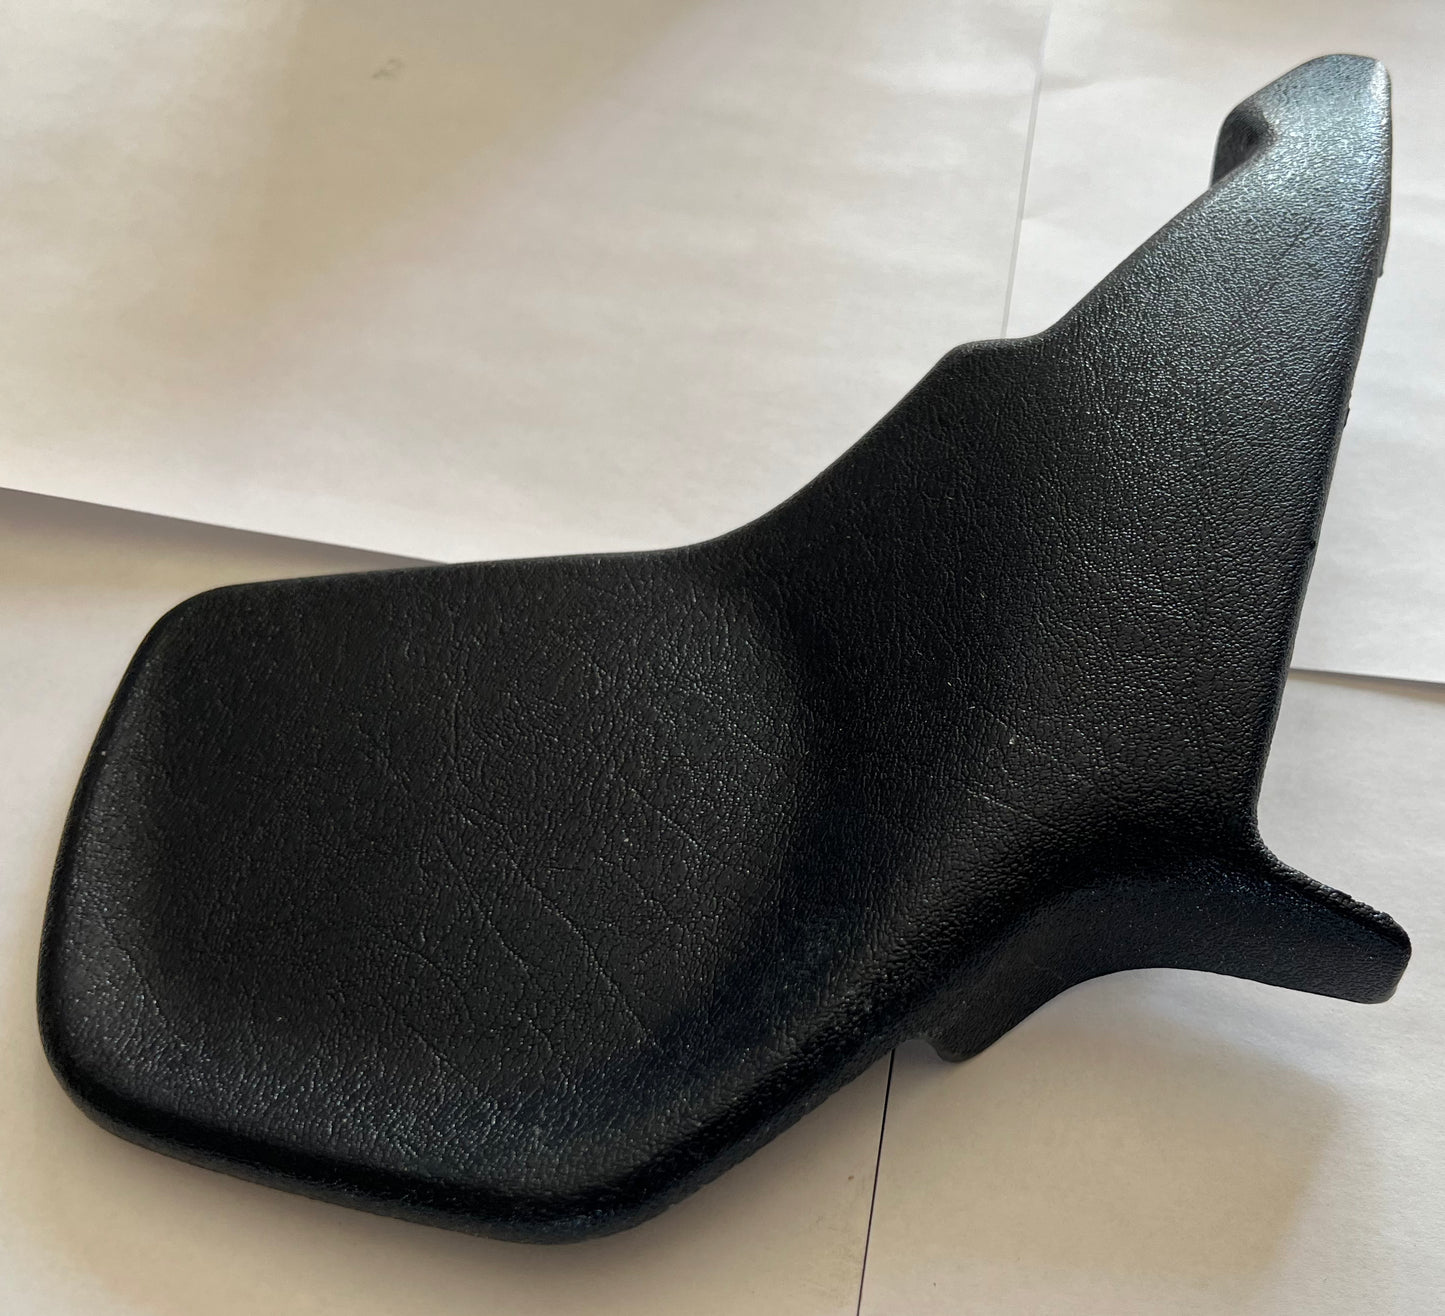 Used Mercedes-Benz Seat Hinge Cover Blue W123